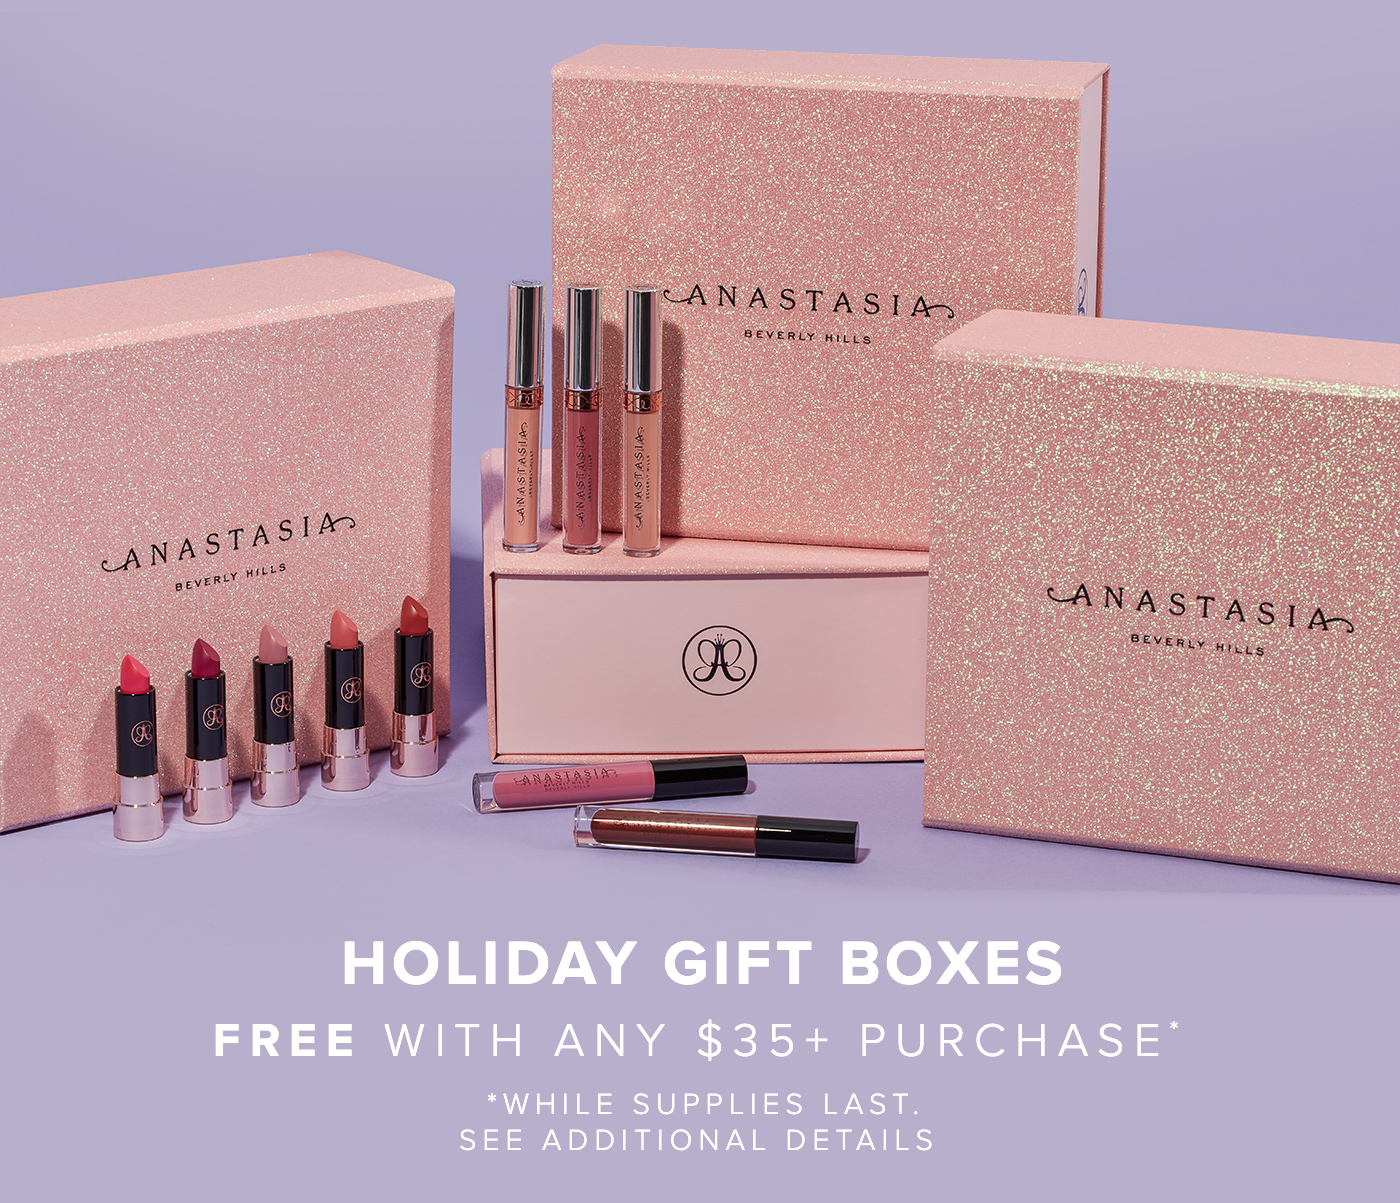 HOLIDAY GIFT BOXES FREE WITH ANY $35+ PURCHASE* *WHILE SUPPLIES LAST. SEE ADDITIONAL DETAILS